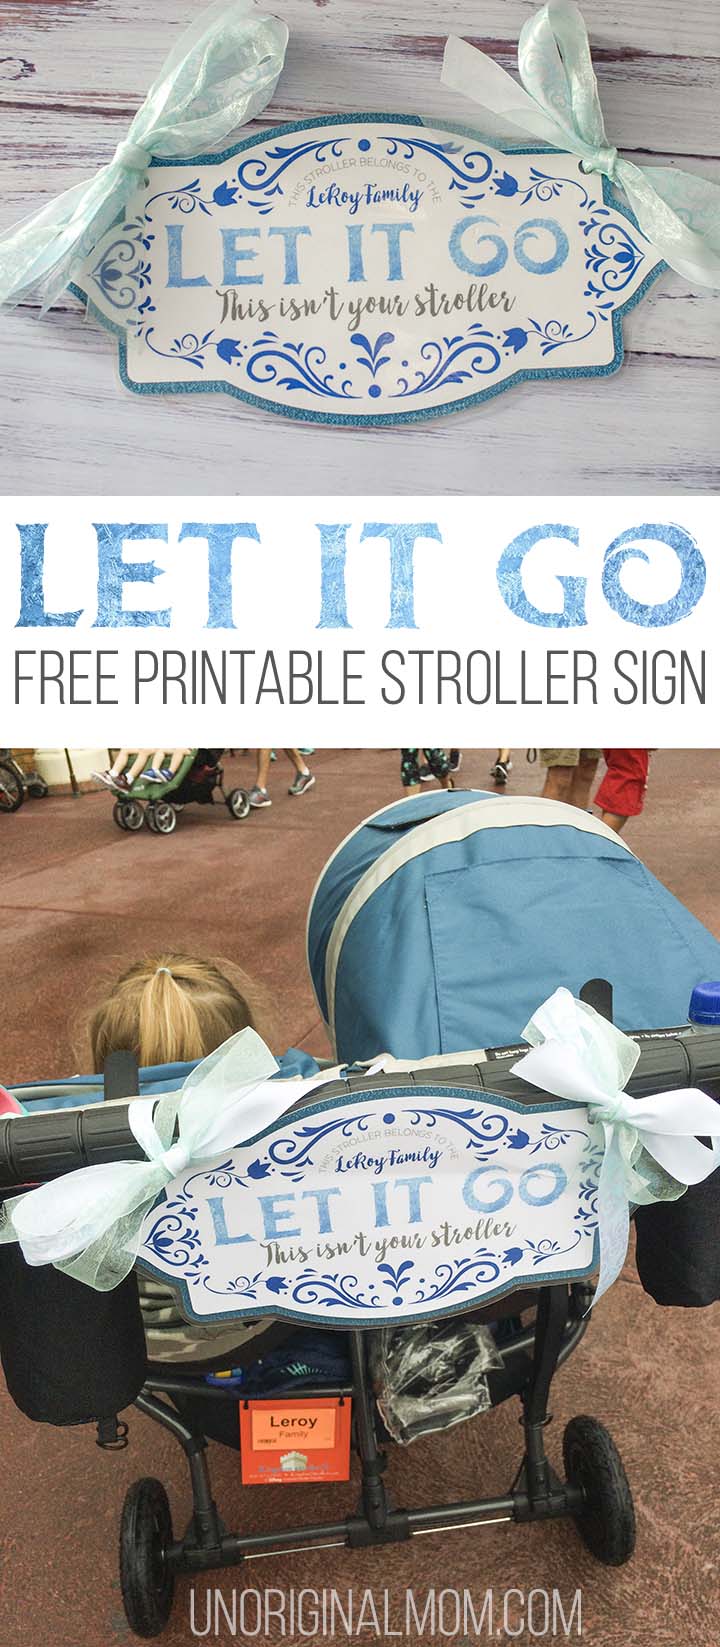 Free printable Frozen stroller sign to use at Disney, plus a review of Kingdom strollers. Great Disney stroller tips, too! #strollersign #disneystroller #freeprintable #disneystrollertips #disneywithtoddlers #kingdomstrollers